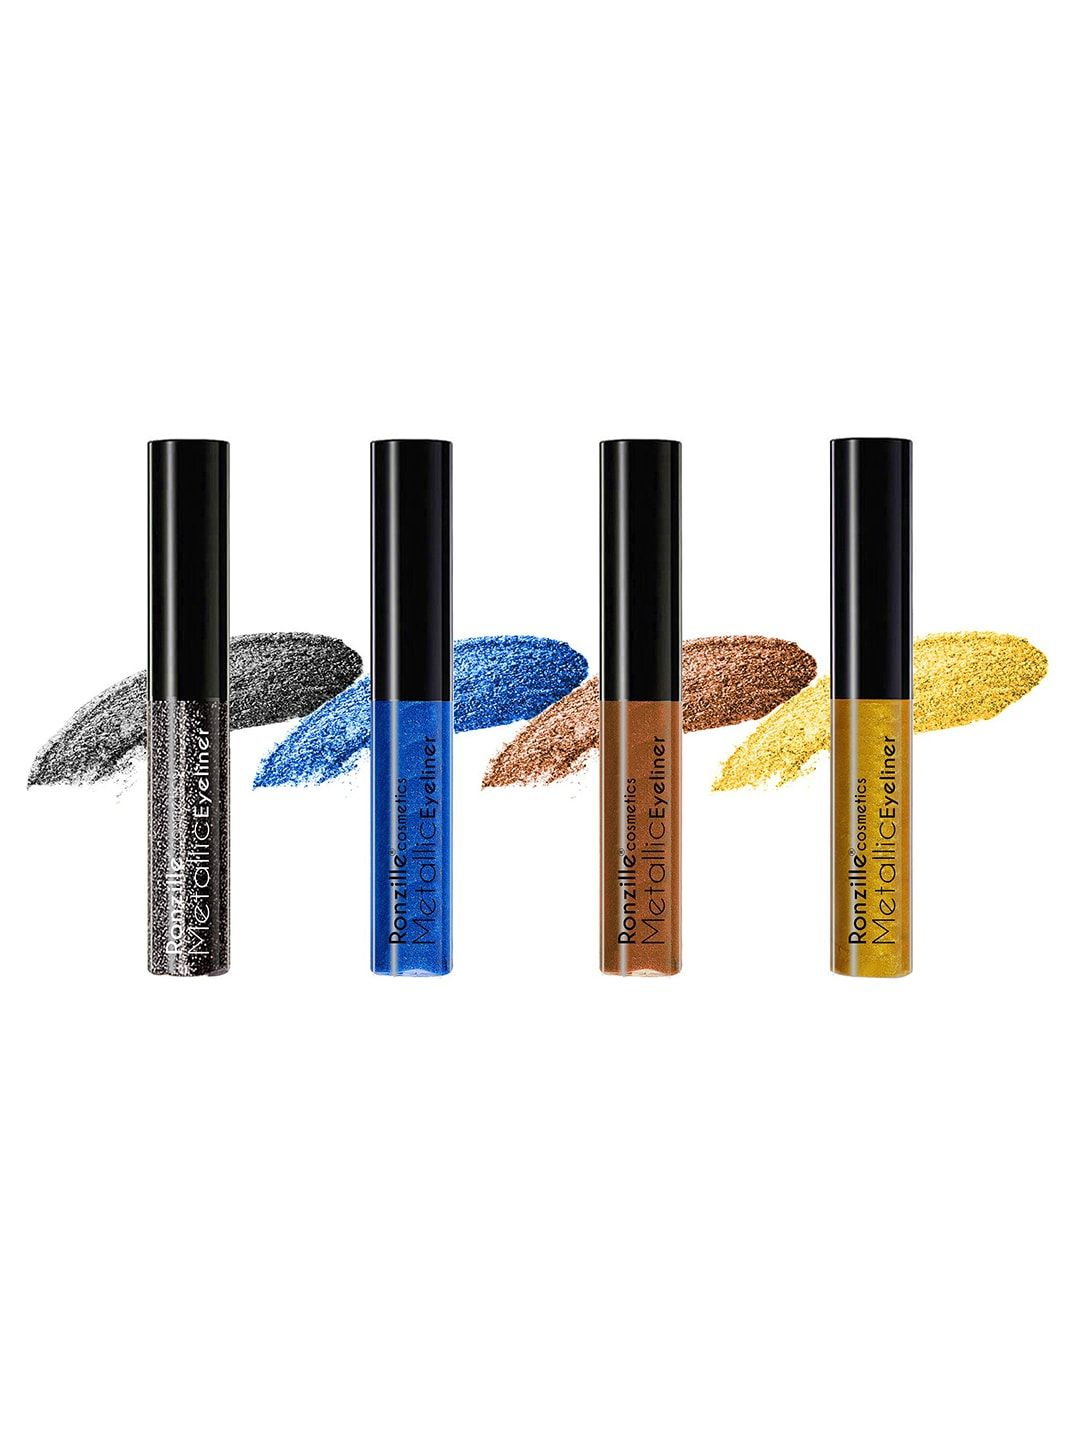 Ronzille Pack Of 4 Glitter Eyeliner - 5 ml Price in India